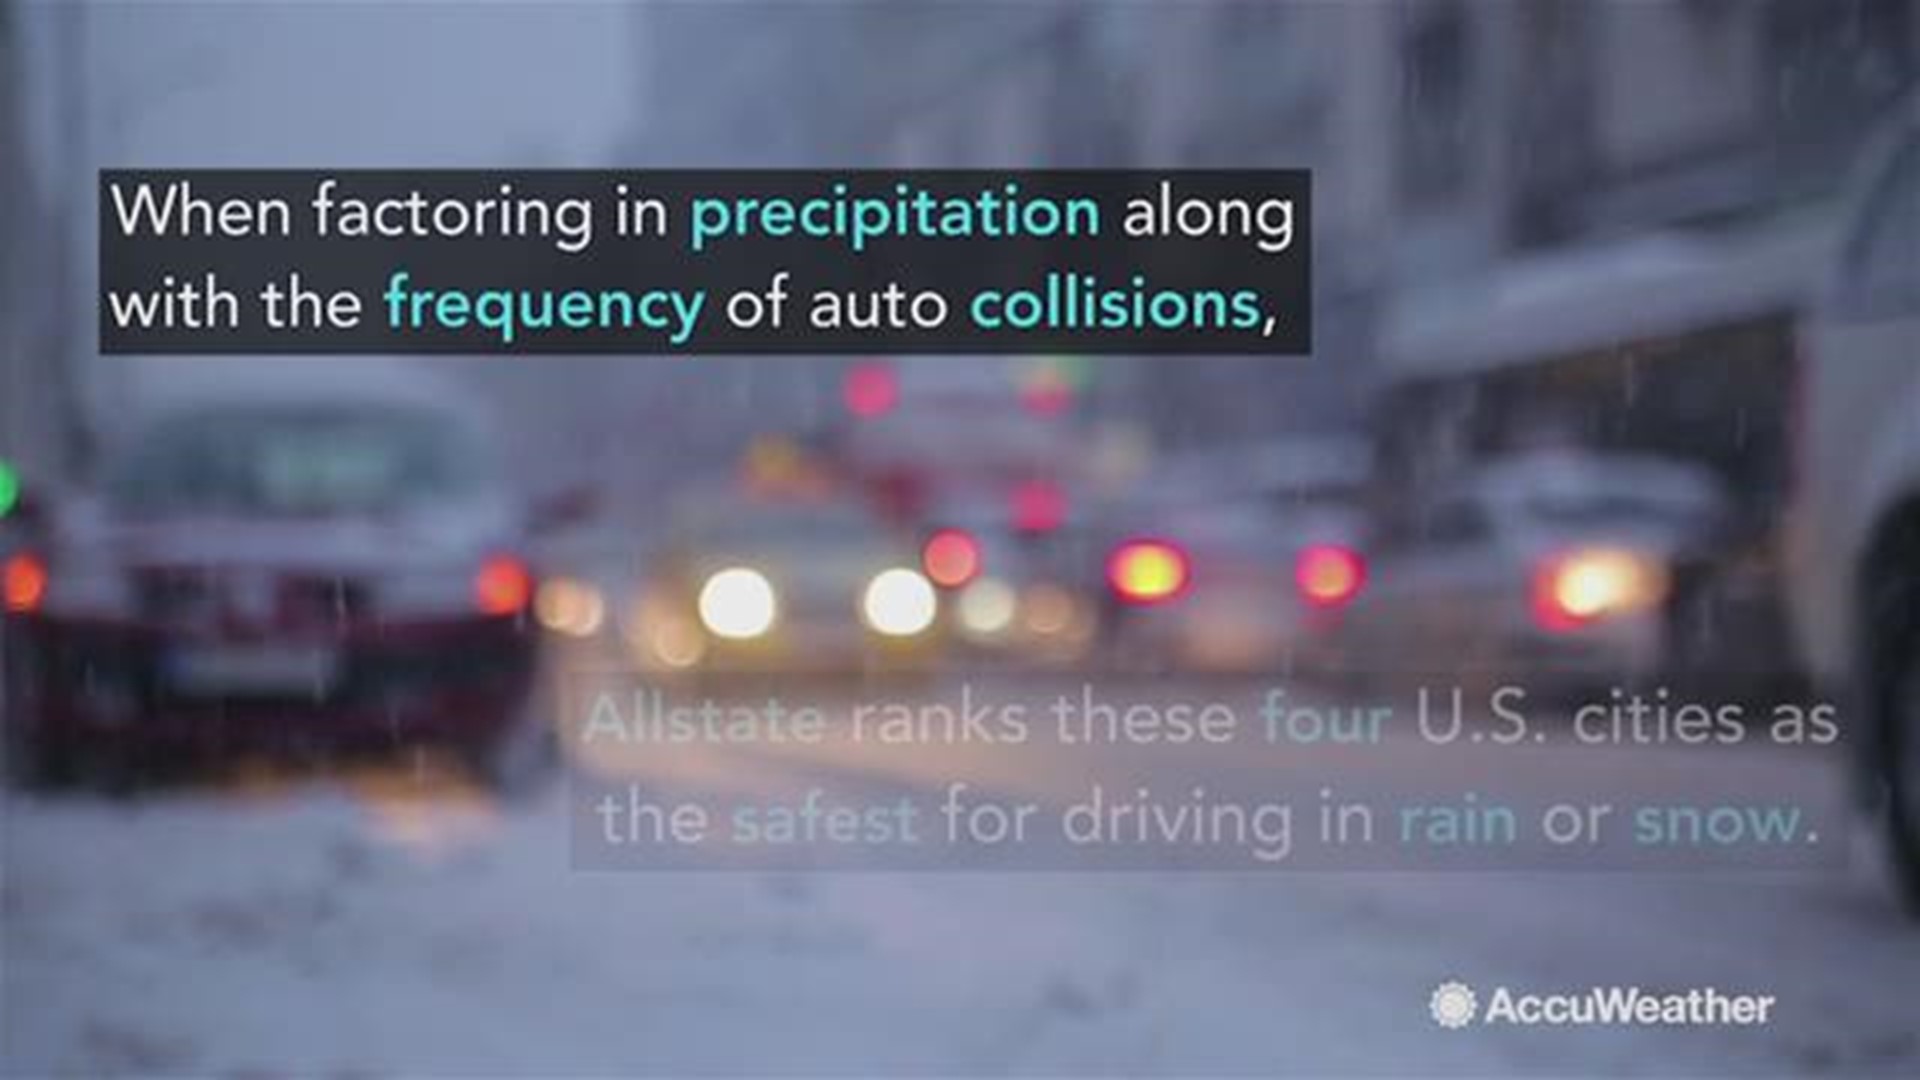 Allstate's 2018 America's Best Drivers Report ranked cities in the United States based on how they safe drivers are when traveling in snowy or rainy conditions as well as how often drivers are involved in collisions.